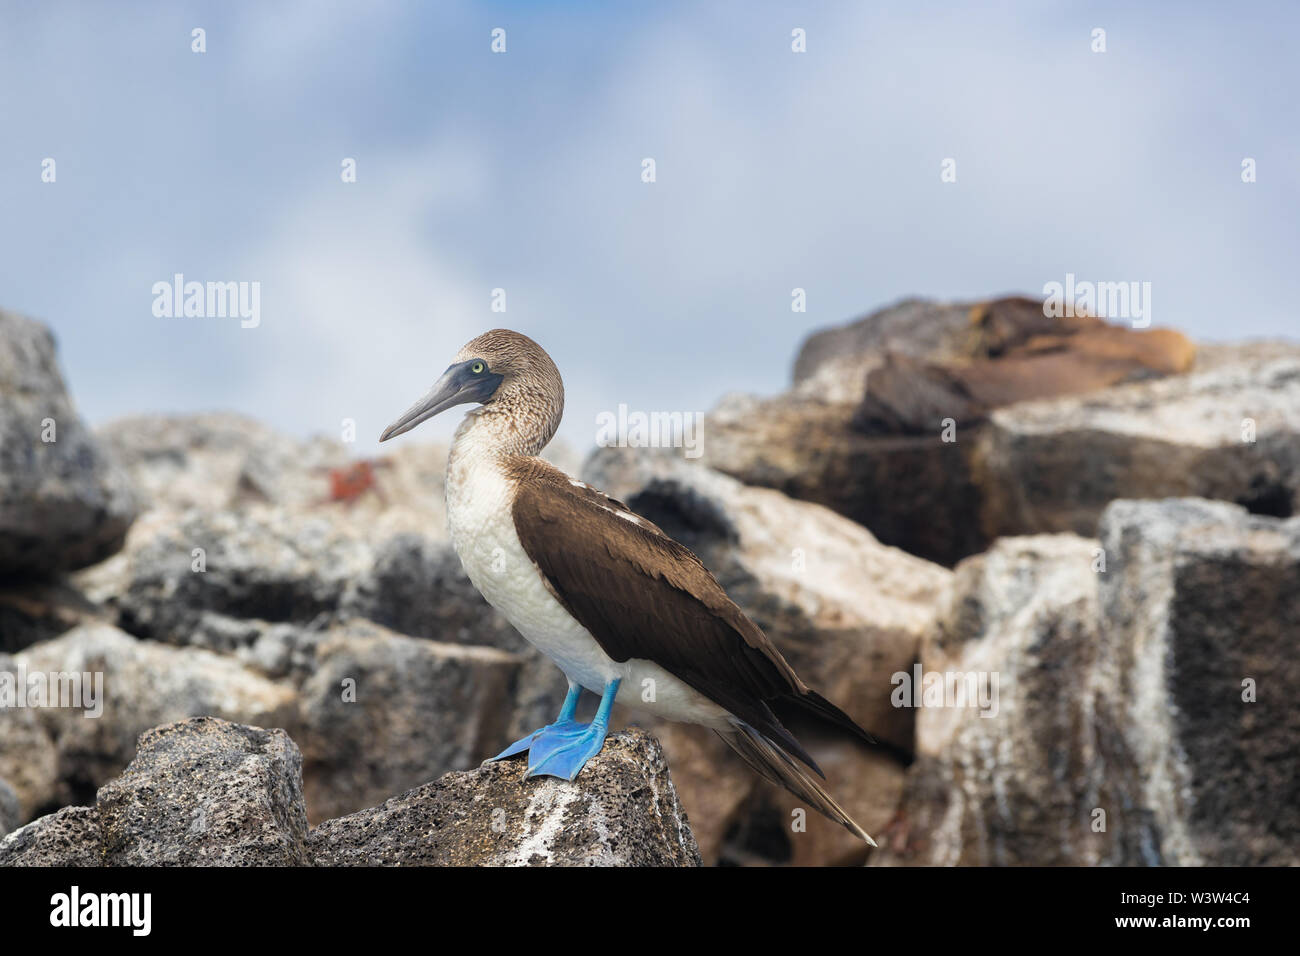 Galapagos animals: Blue-footed Booby - Iconic famous galapagos wildlife Stock Photo